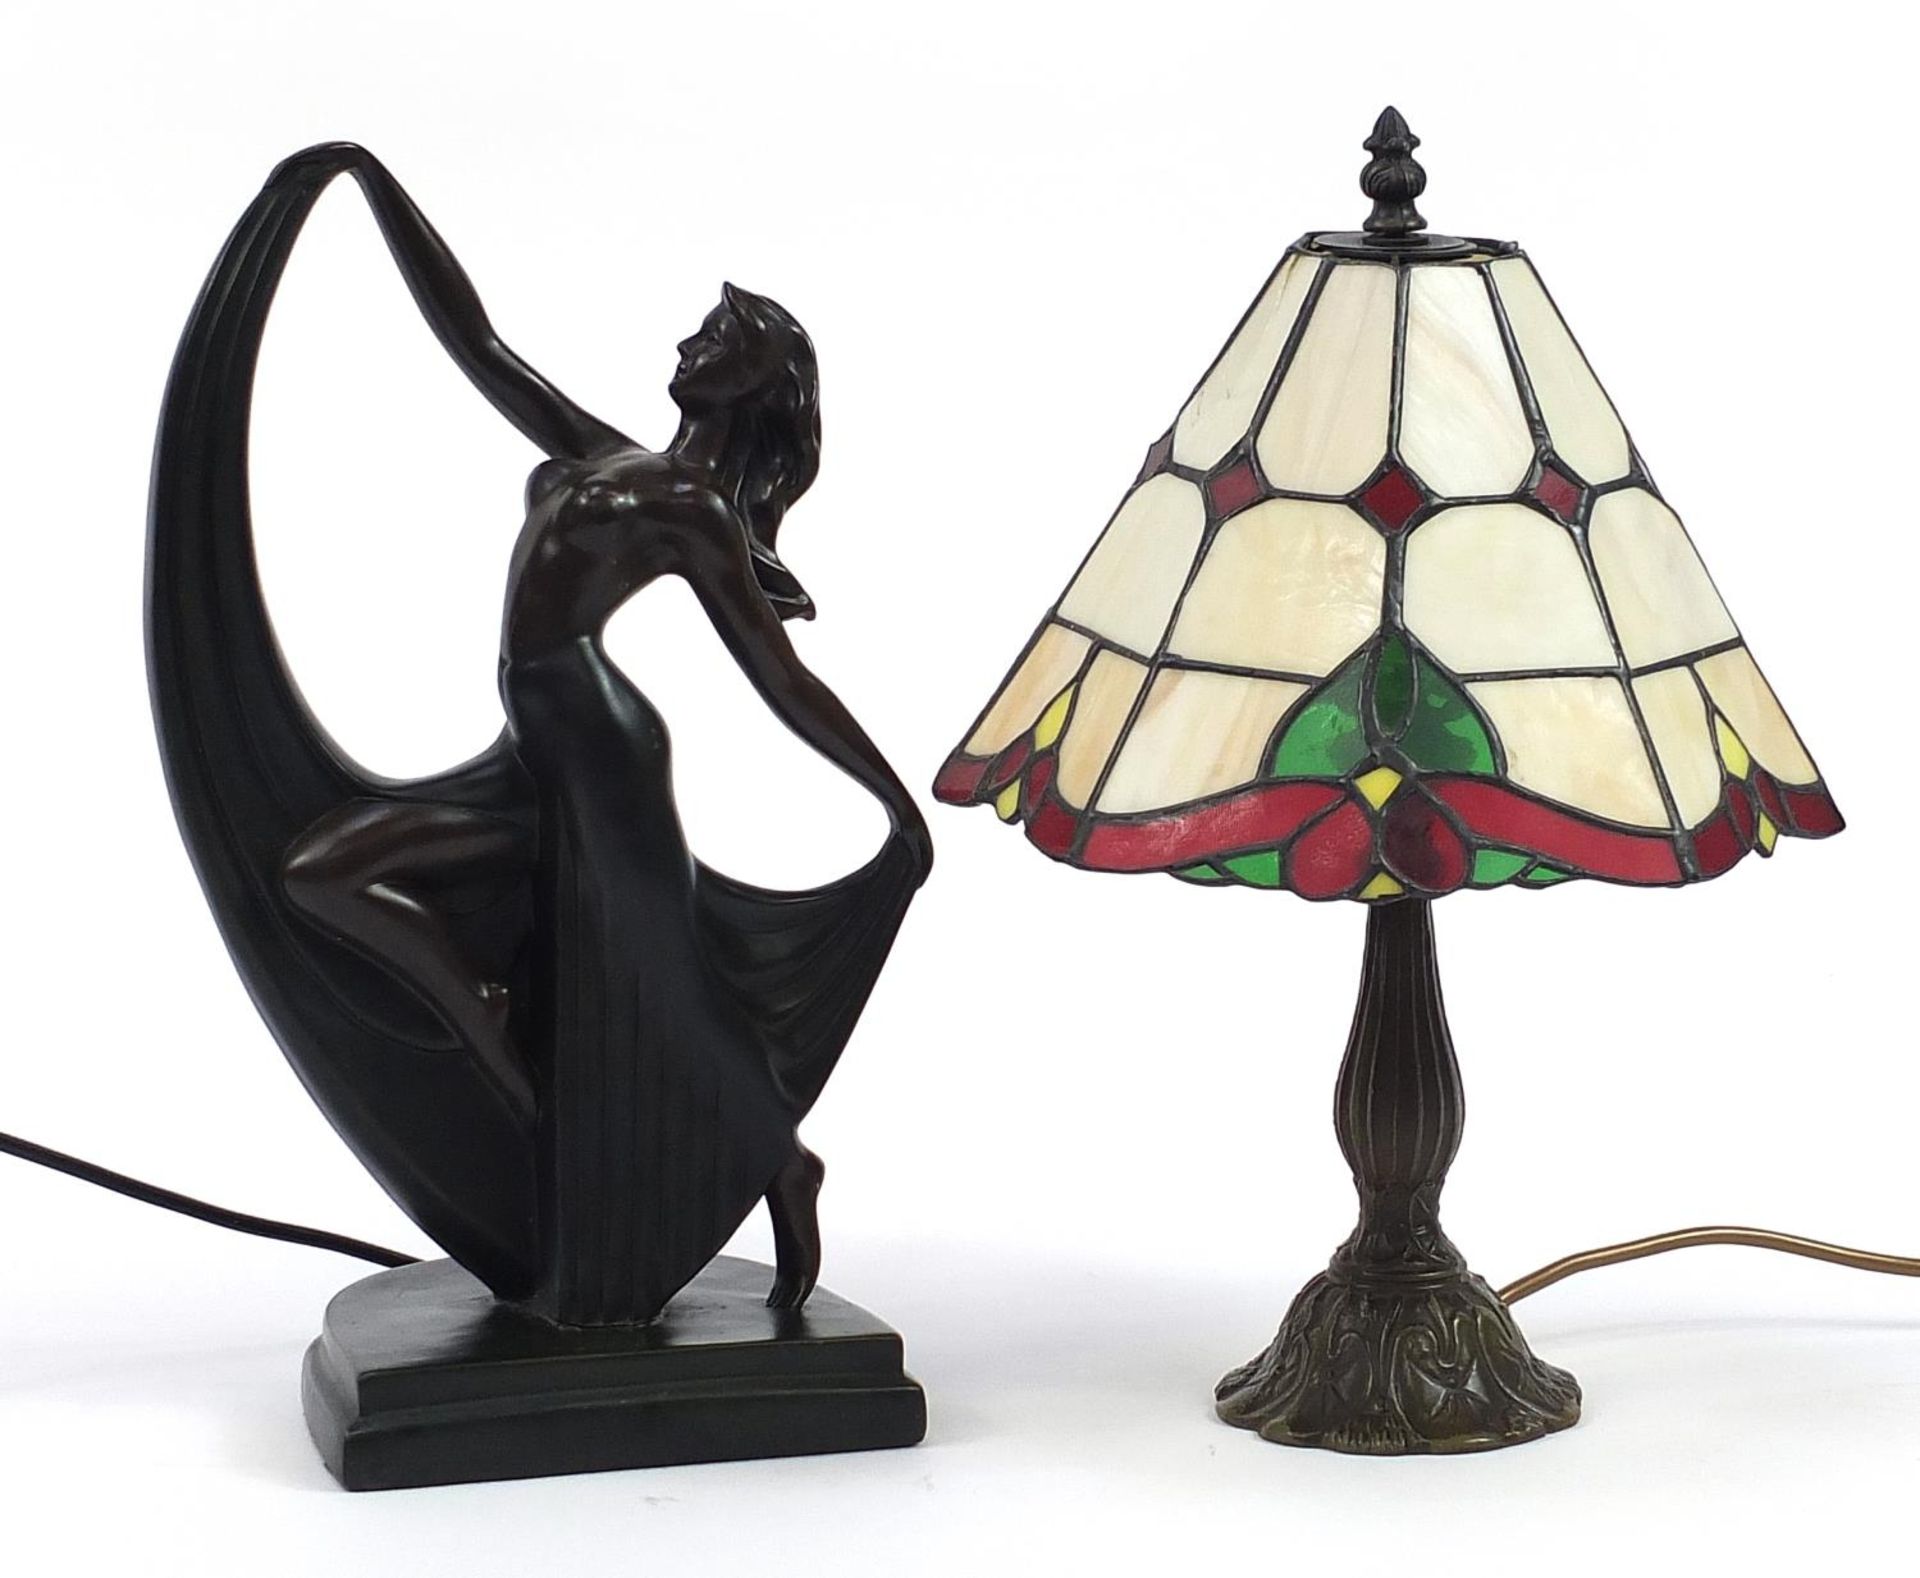 Bronzed Tiffany design table lamp with leaded glass shade and an Art Deco dancer table lamp, the